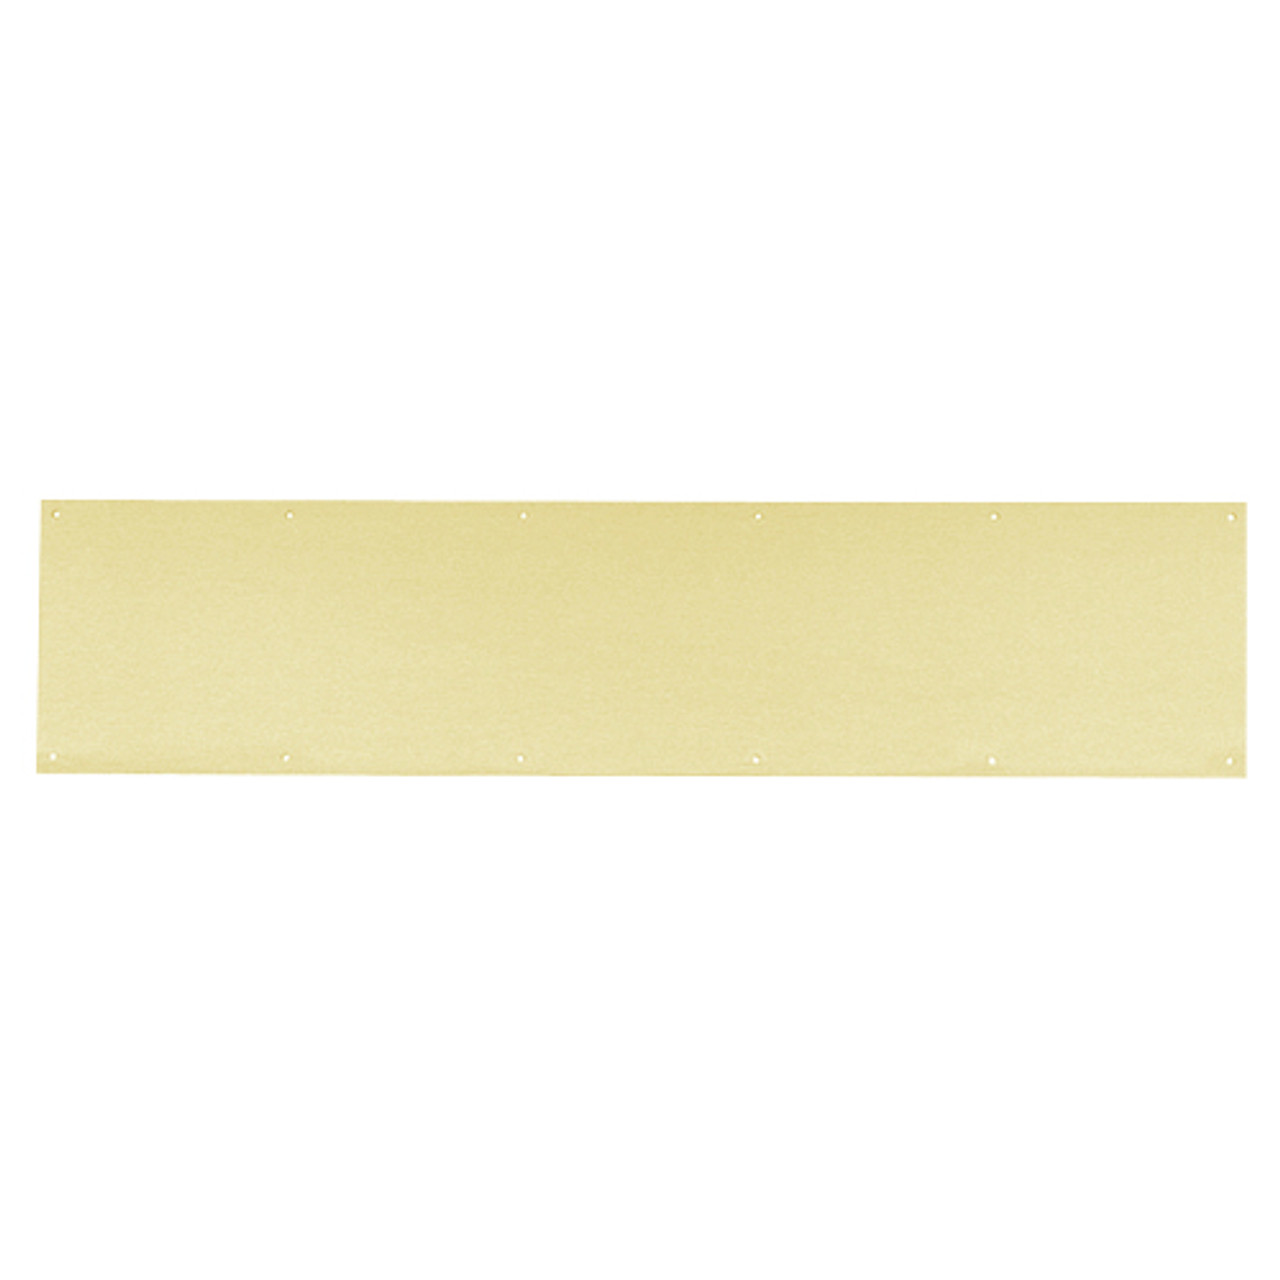 8400-US4-6x46-B-CS Ives 8400 Series Protection Plate in Satin Brass